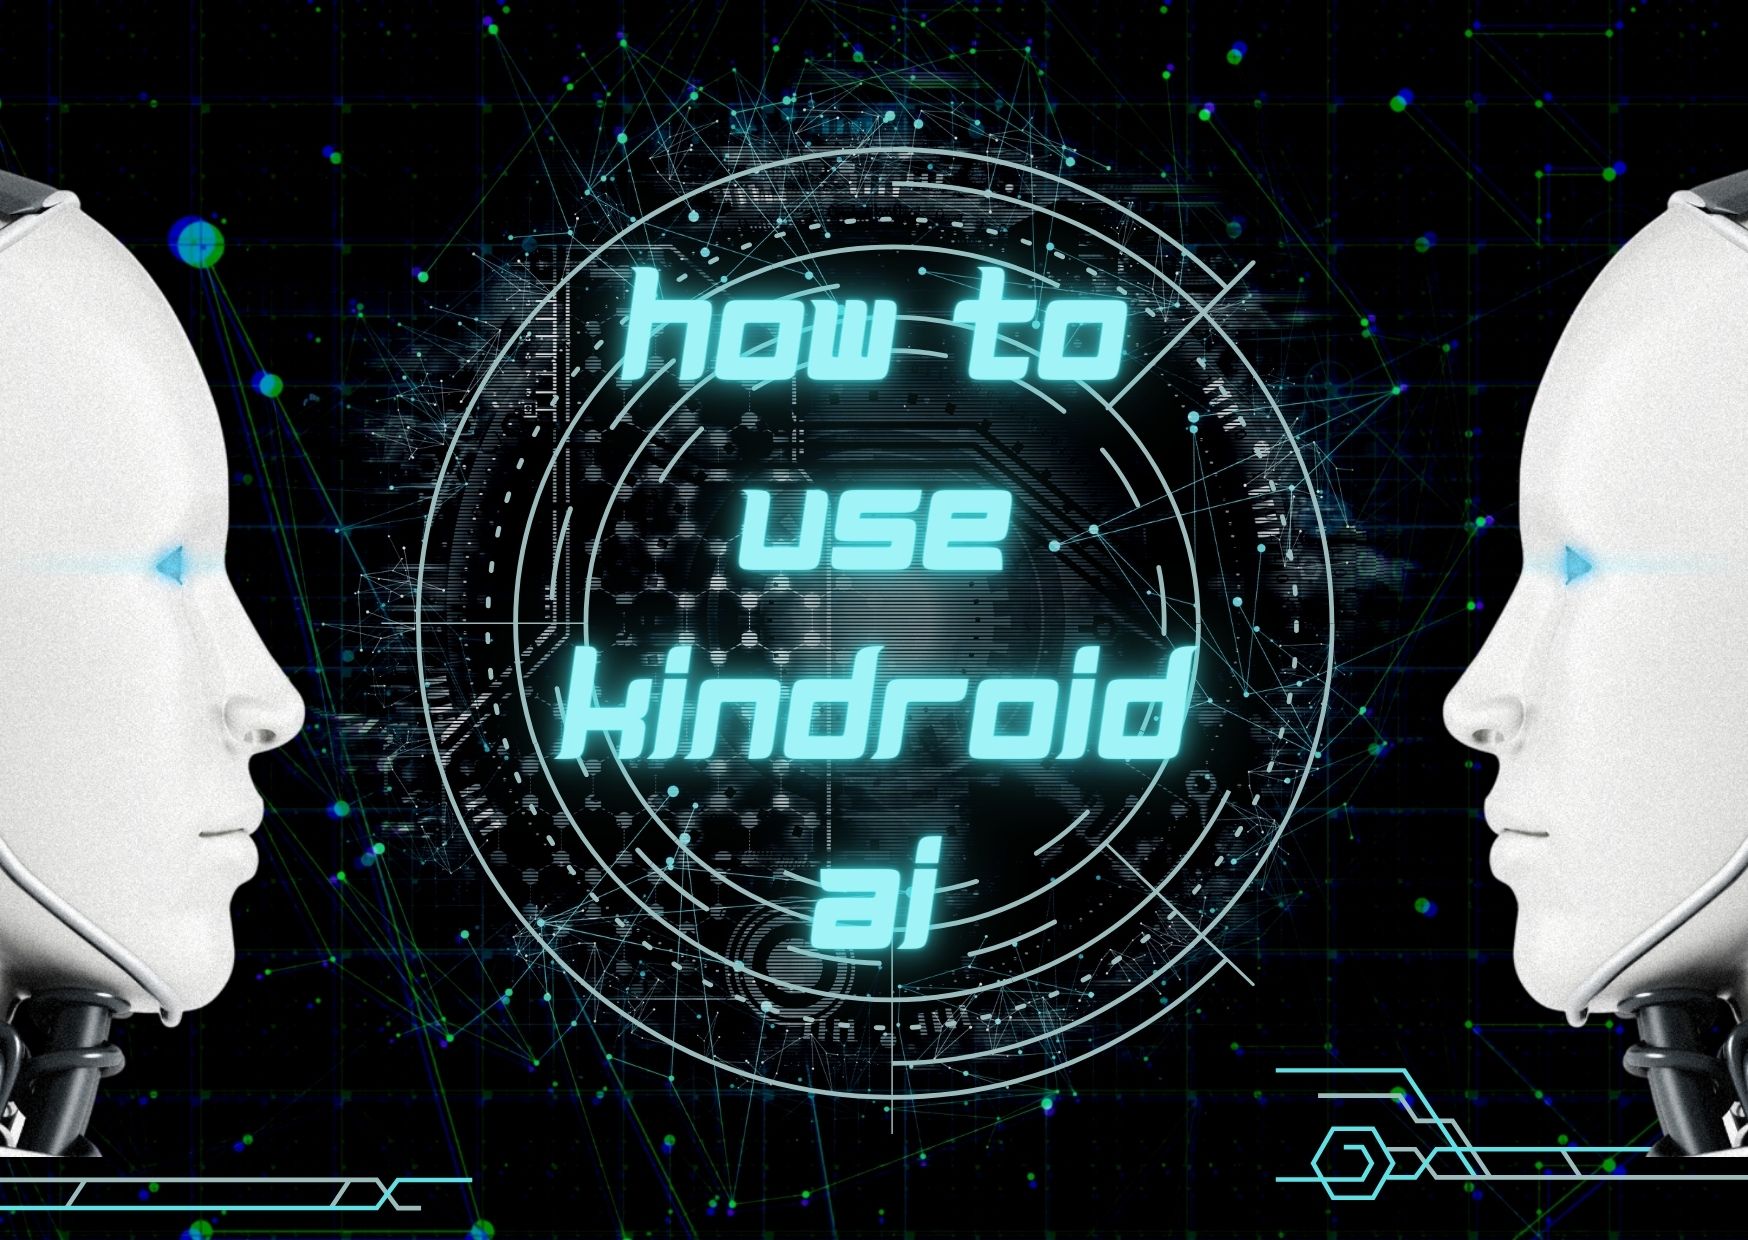 How to Use Kindroid AI